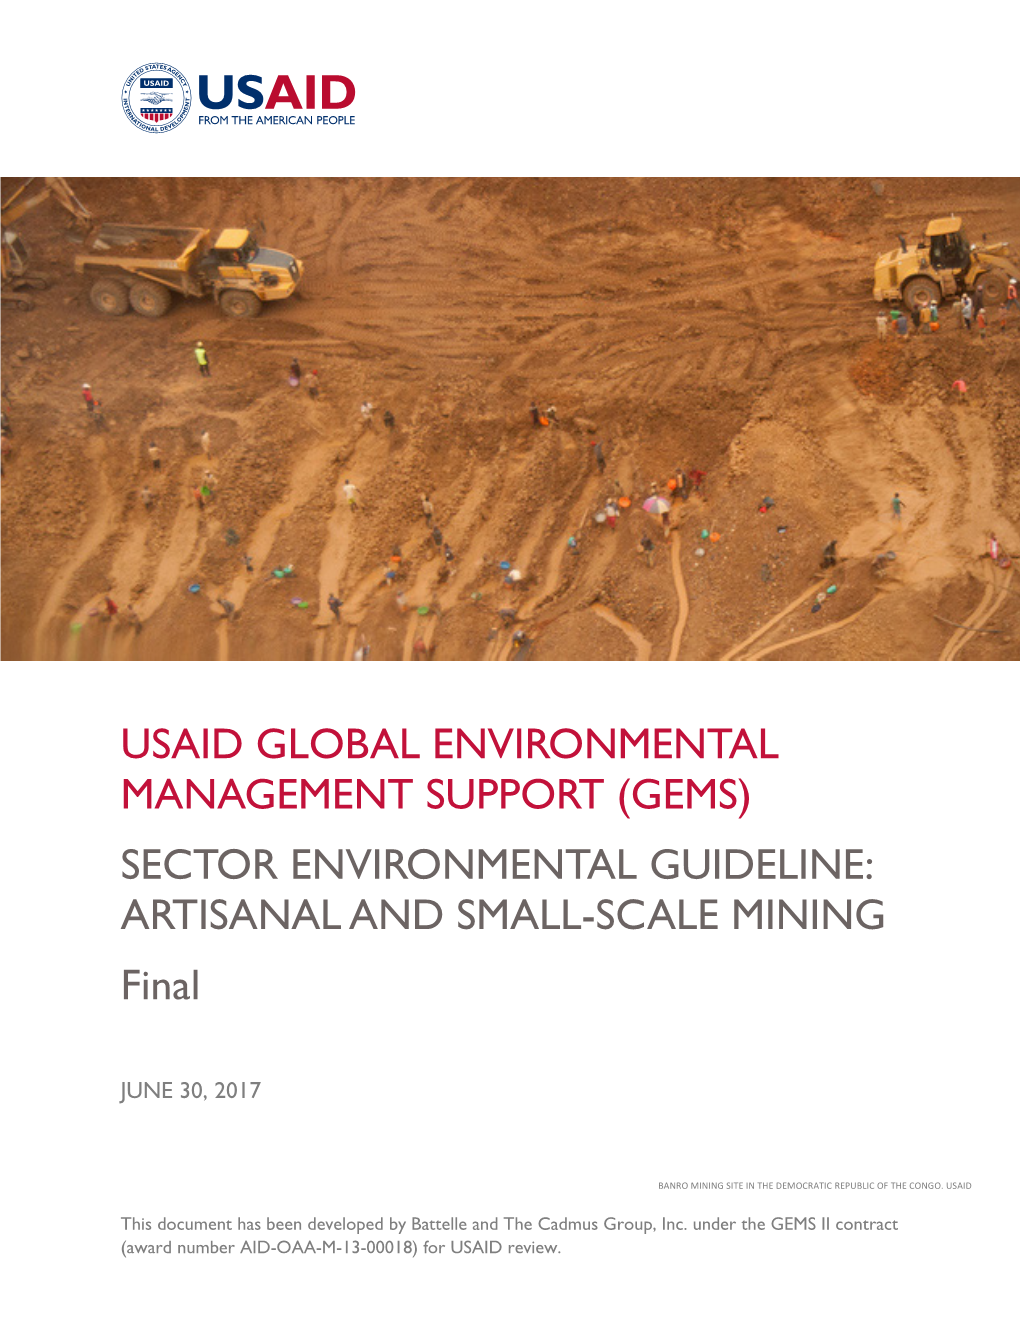 SECTOR ENVIRONMENTAL GUIDELINE: ARTISANAL and SMALL-SCALE MINING Final